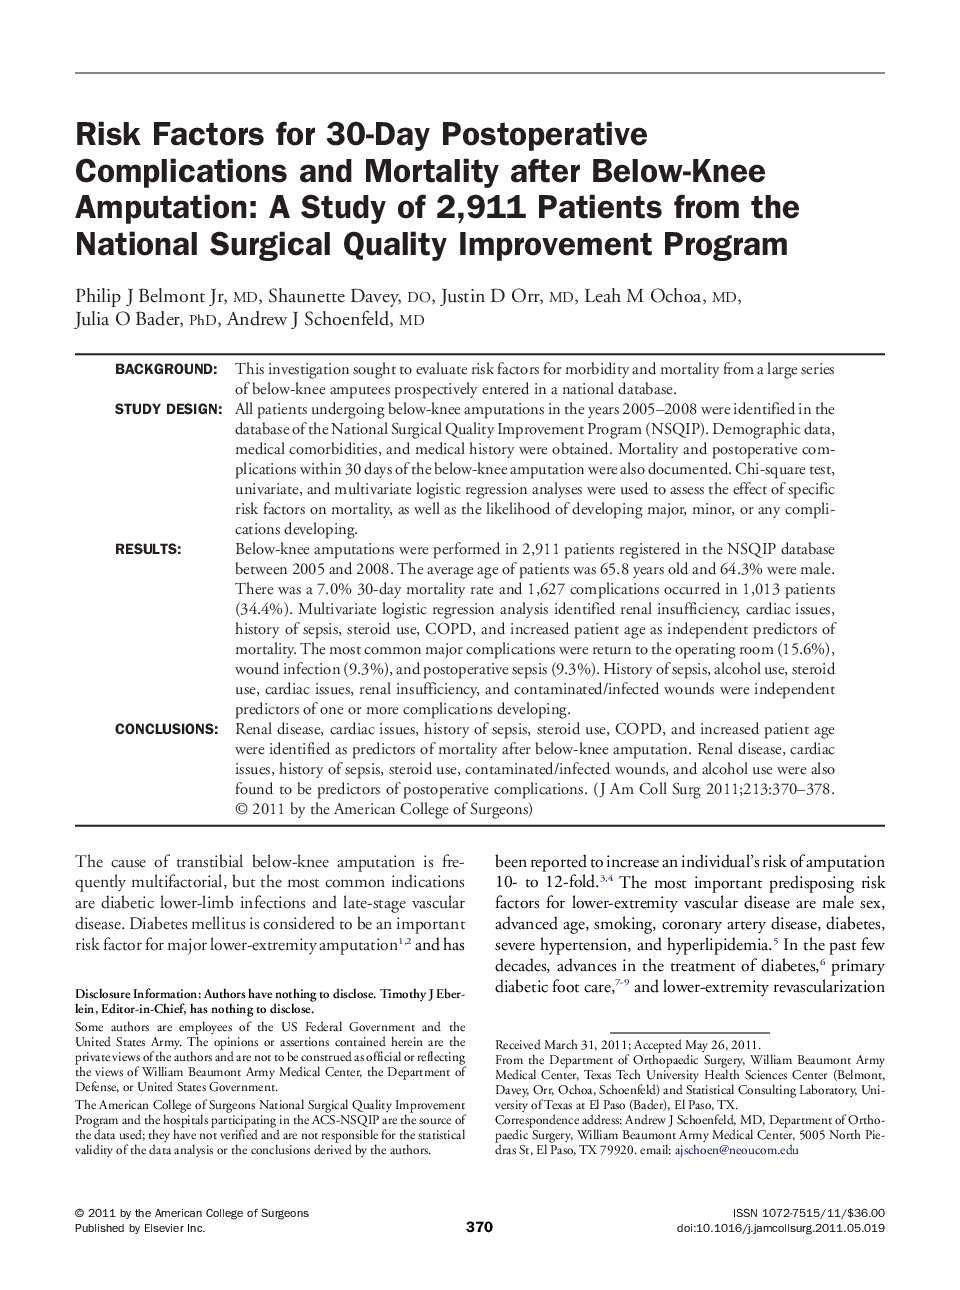 Risk Factors for 30-Day Postoperative Complications and Mortality after Below-Knee Amputation: A Study of 2,911 Patients from the National Surgical Quality Improvement Program 